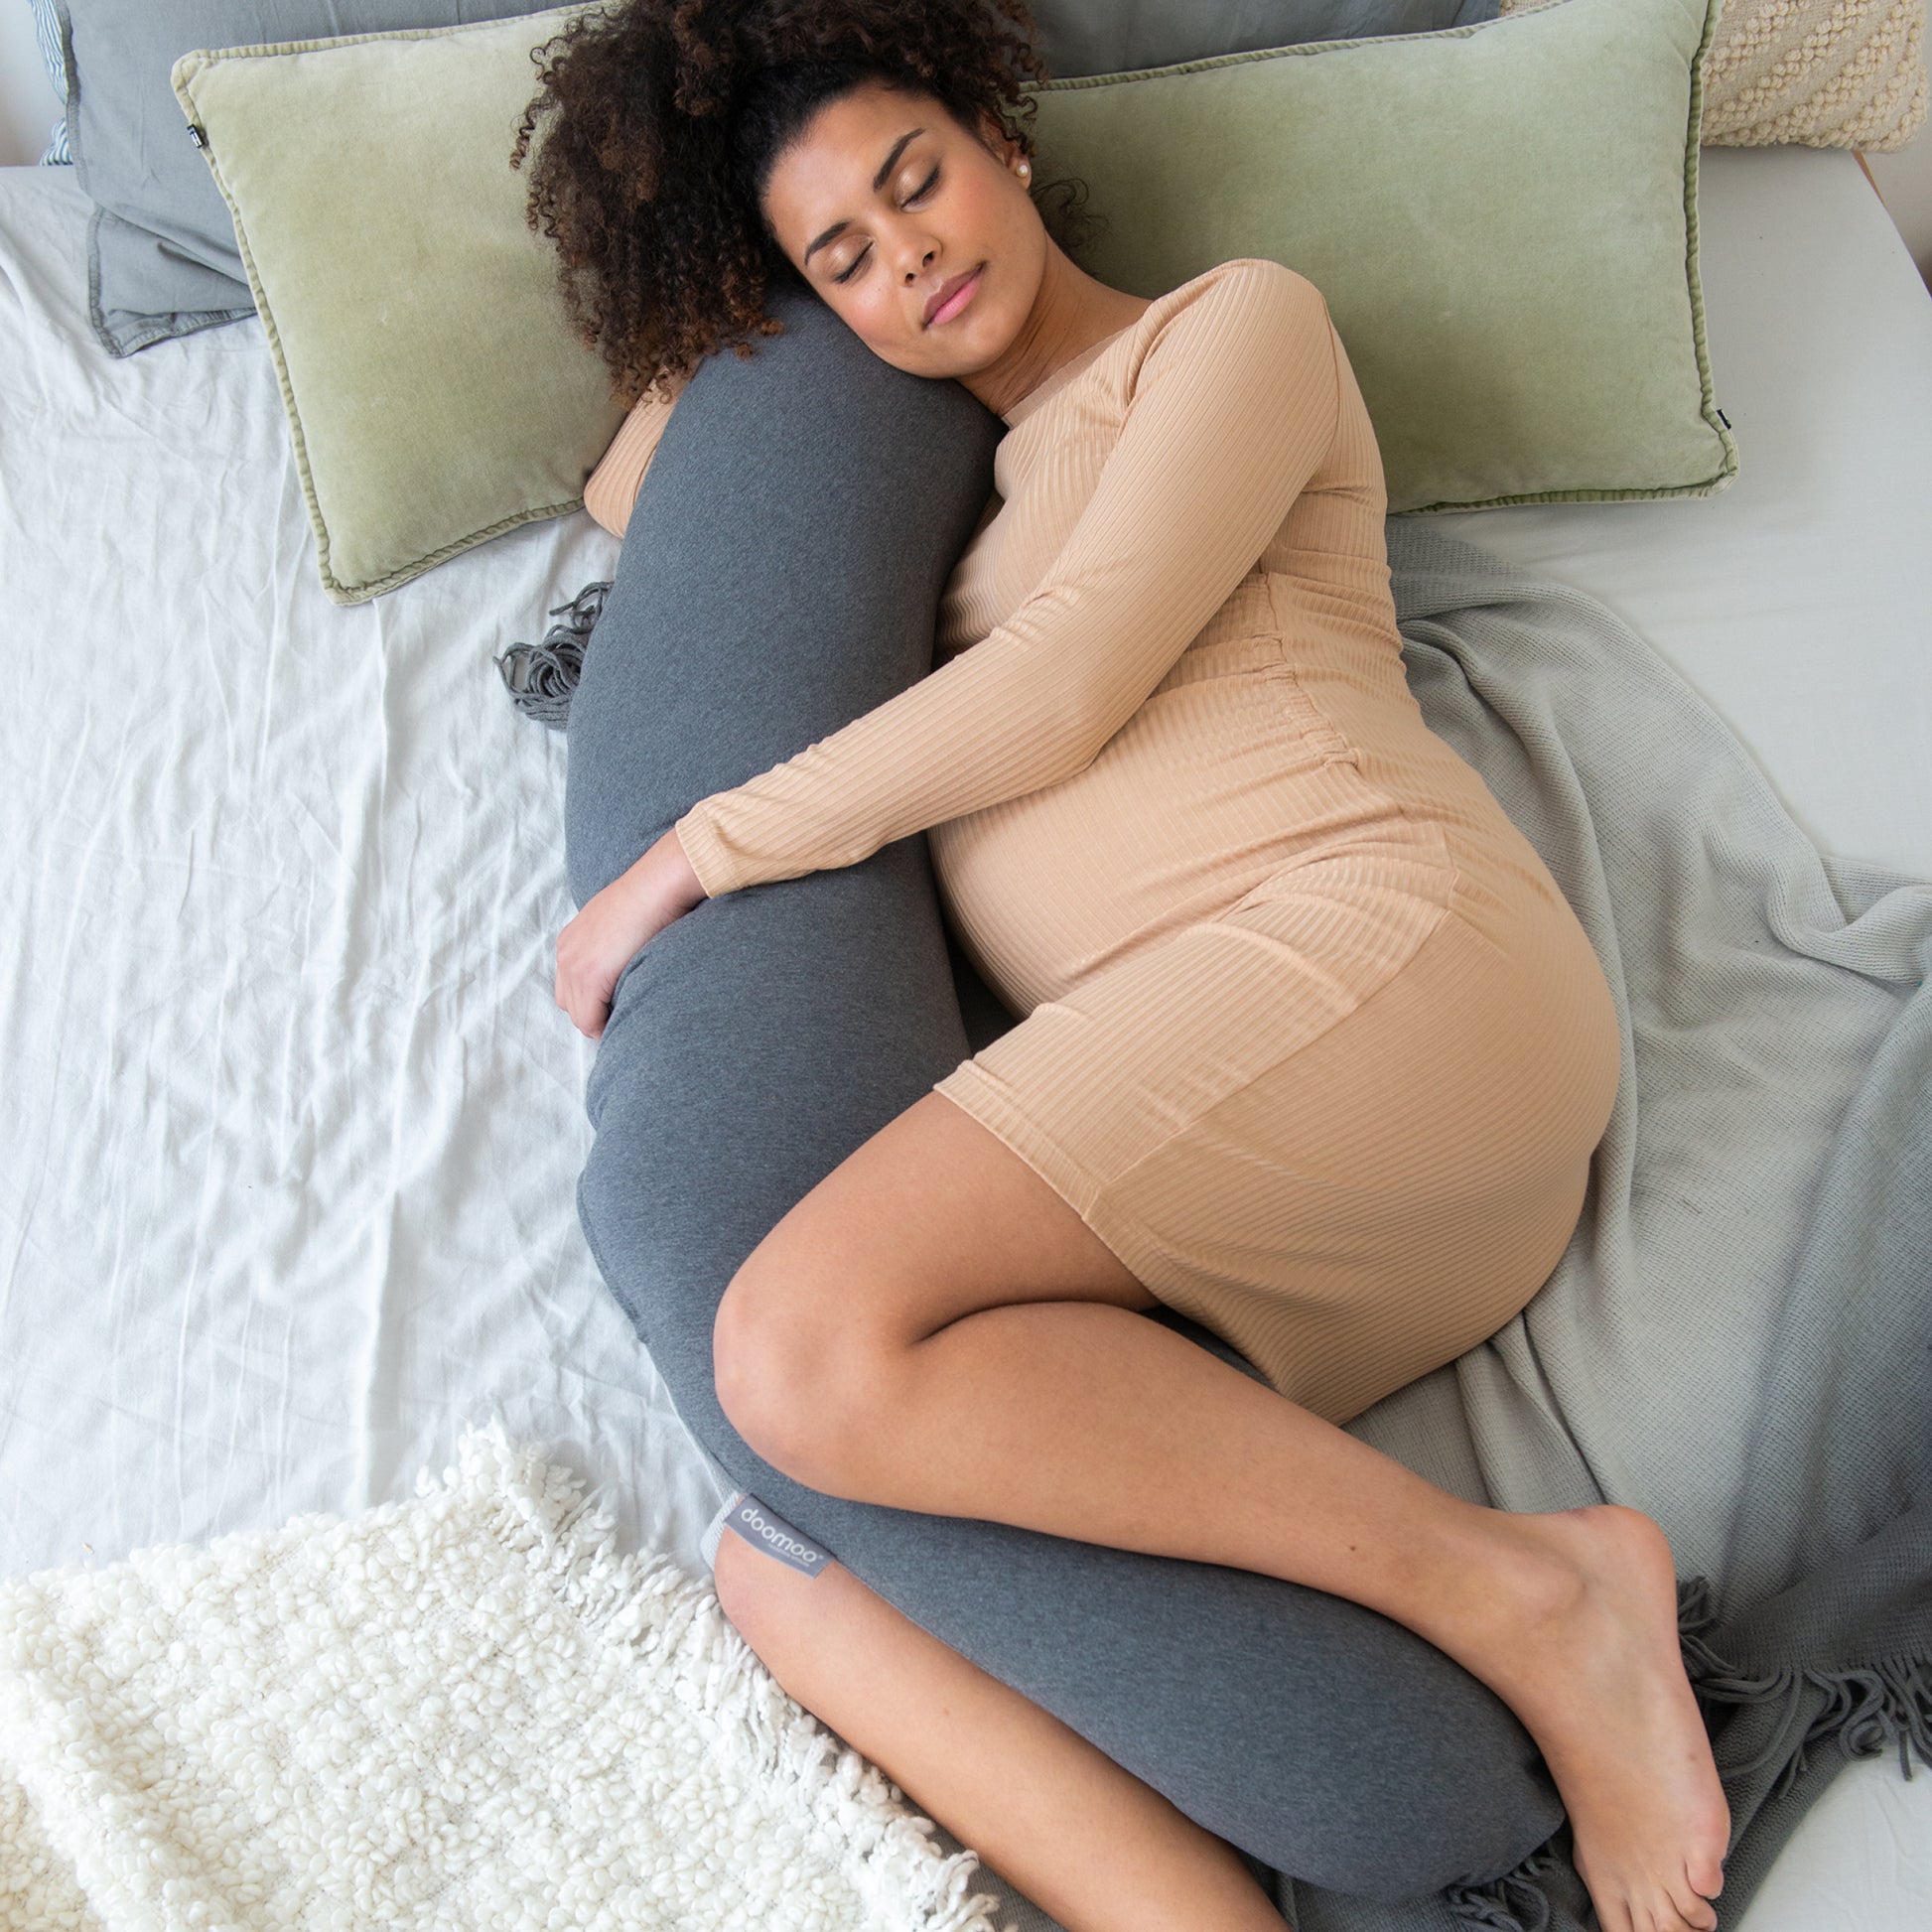 large maternity pillow. During pregnancy and for breastfeeding - Chine Anthracite